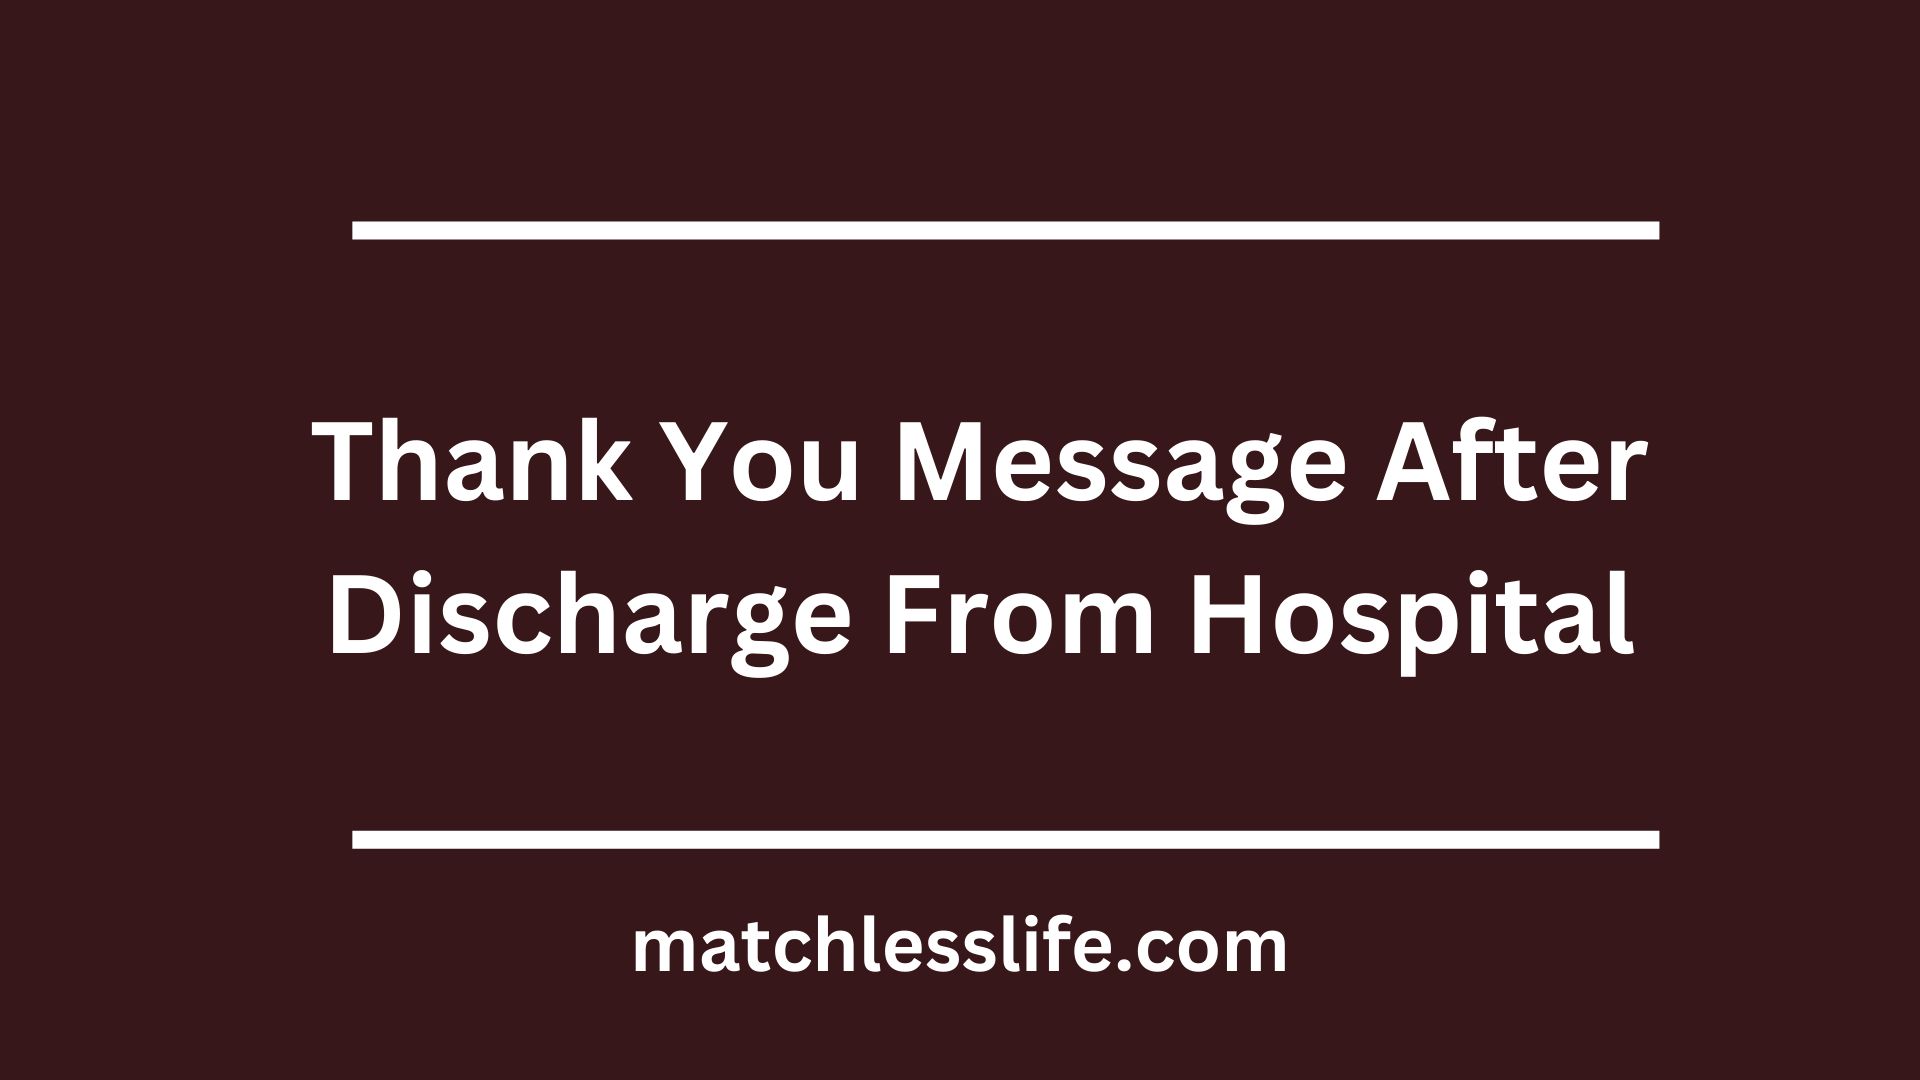 Thank You Message After Discharge From Hospital